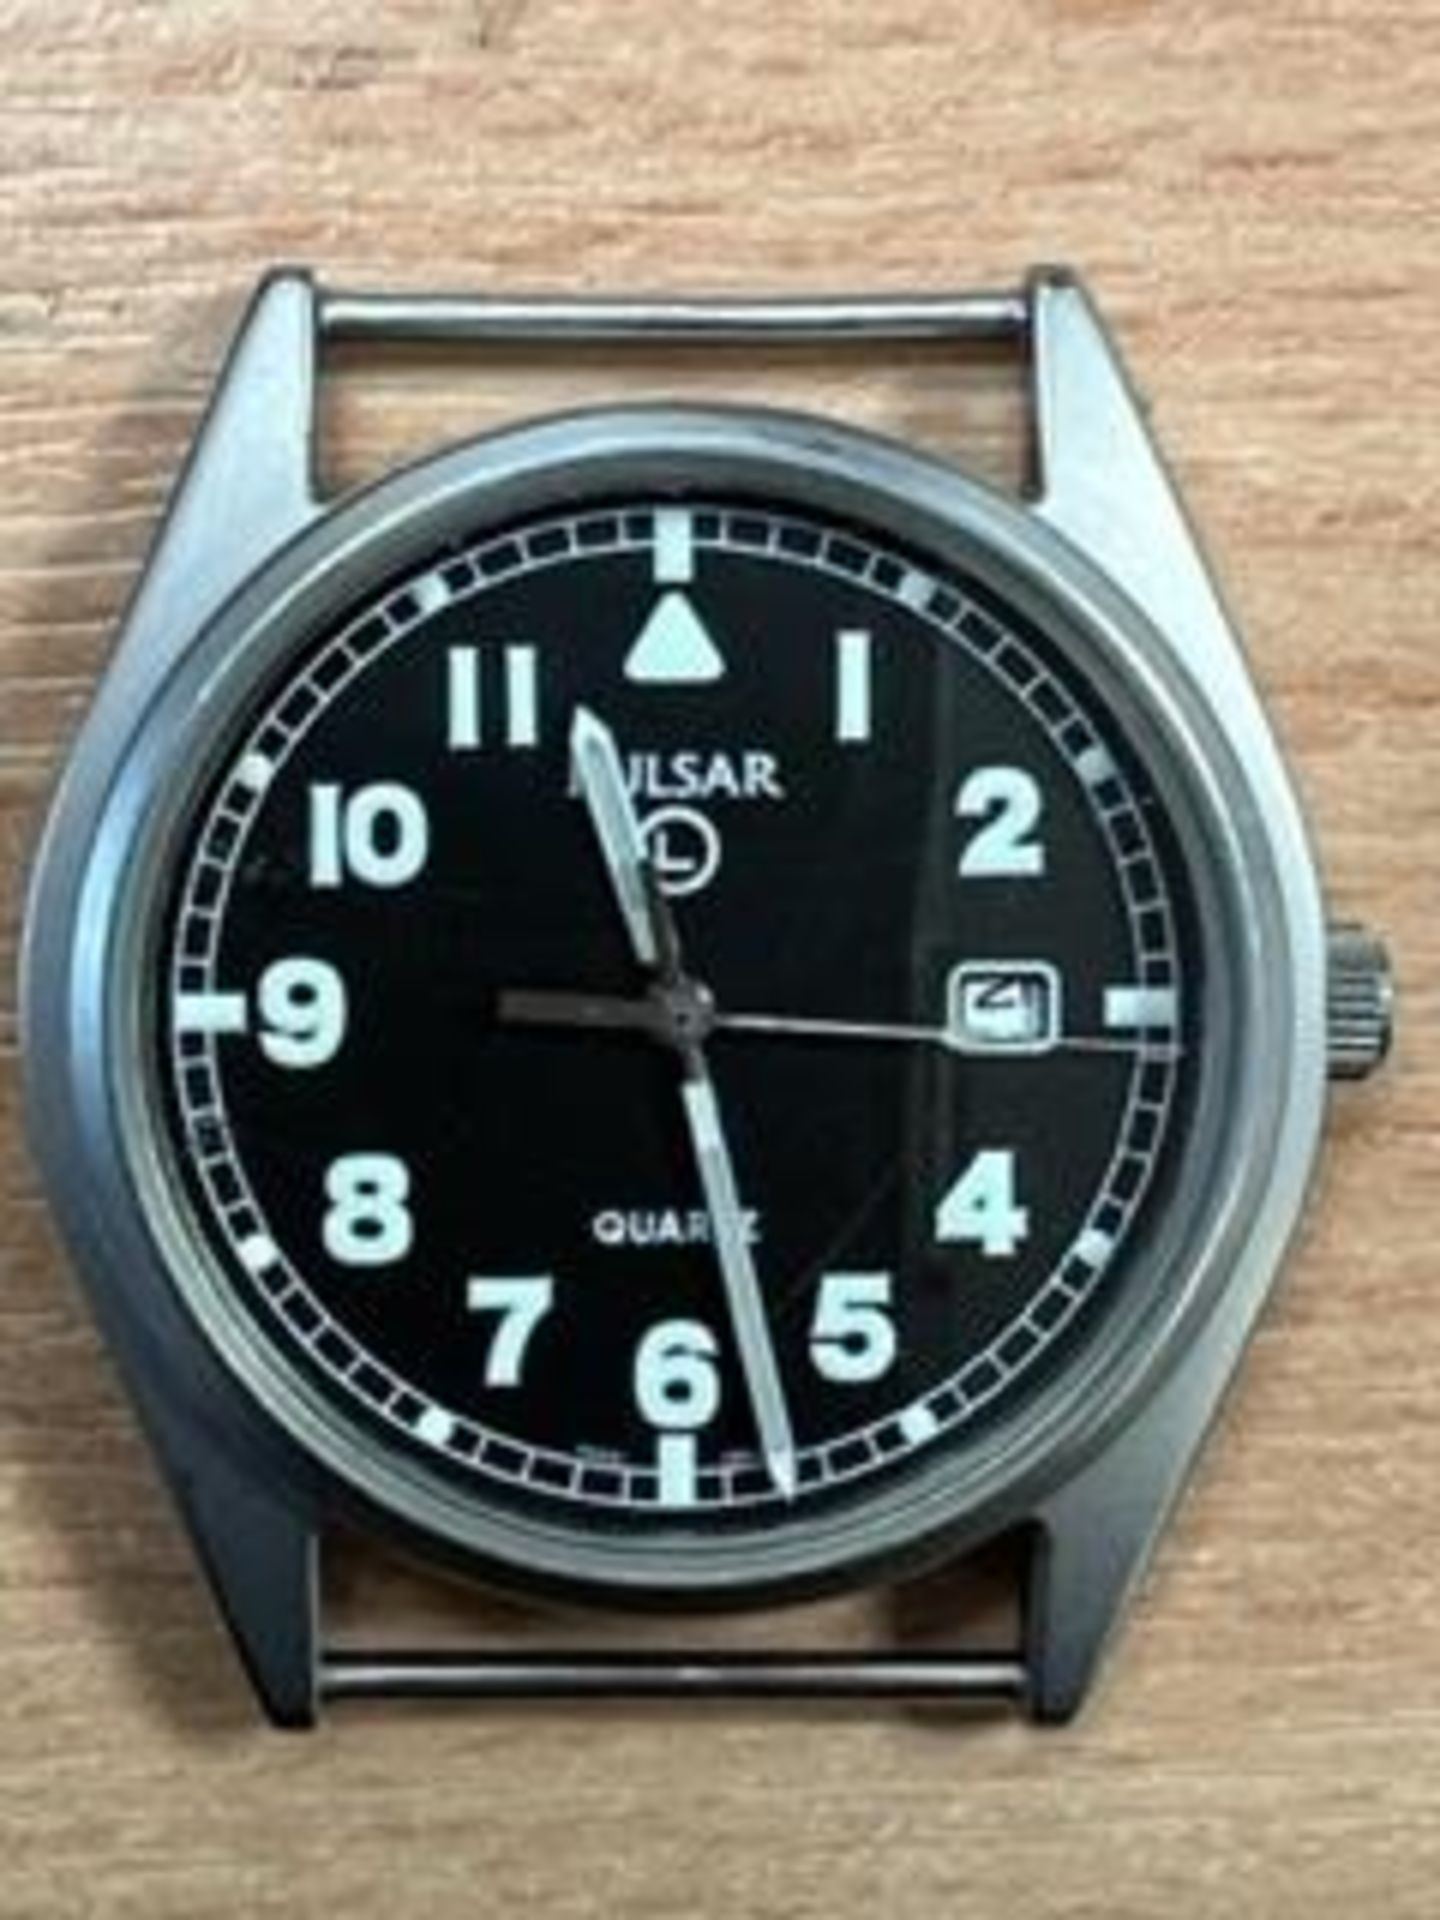 PULSAR BRITISH ARMY W10 SERVICE WATCH WATER RESISTANT NATO MARKS DATE 2004 - Image 3 of 6